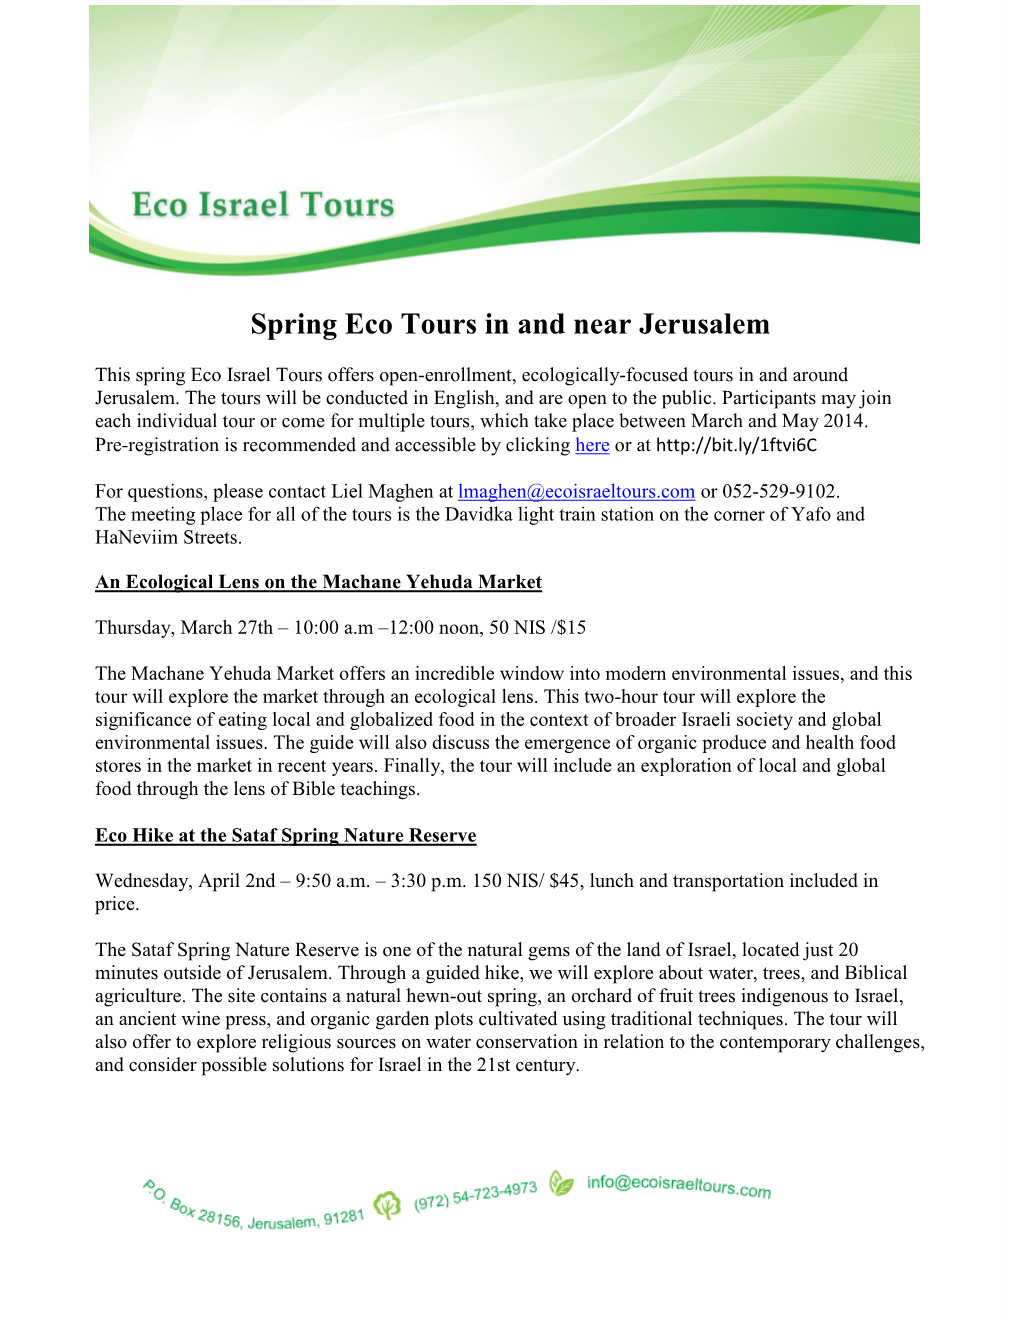 Eco Israel Tours Weekly Spring Tours 2014